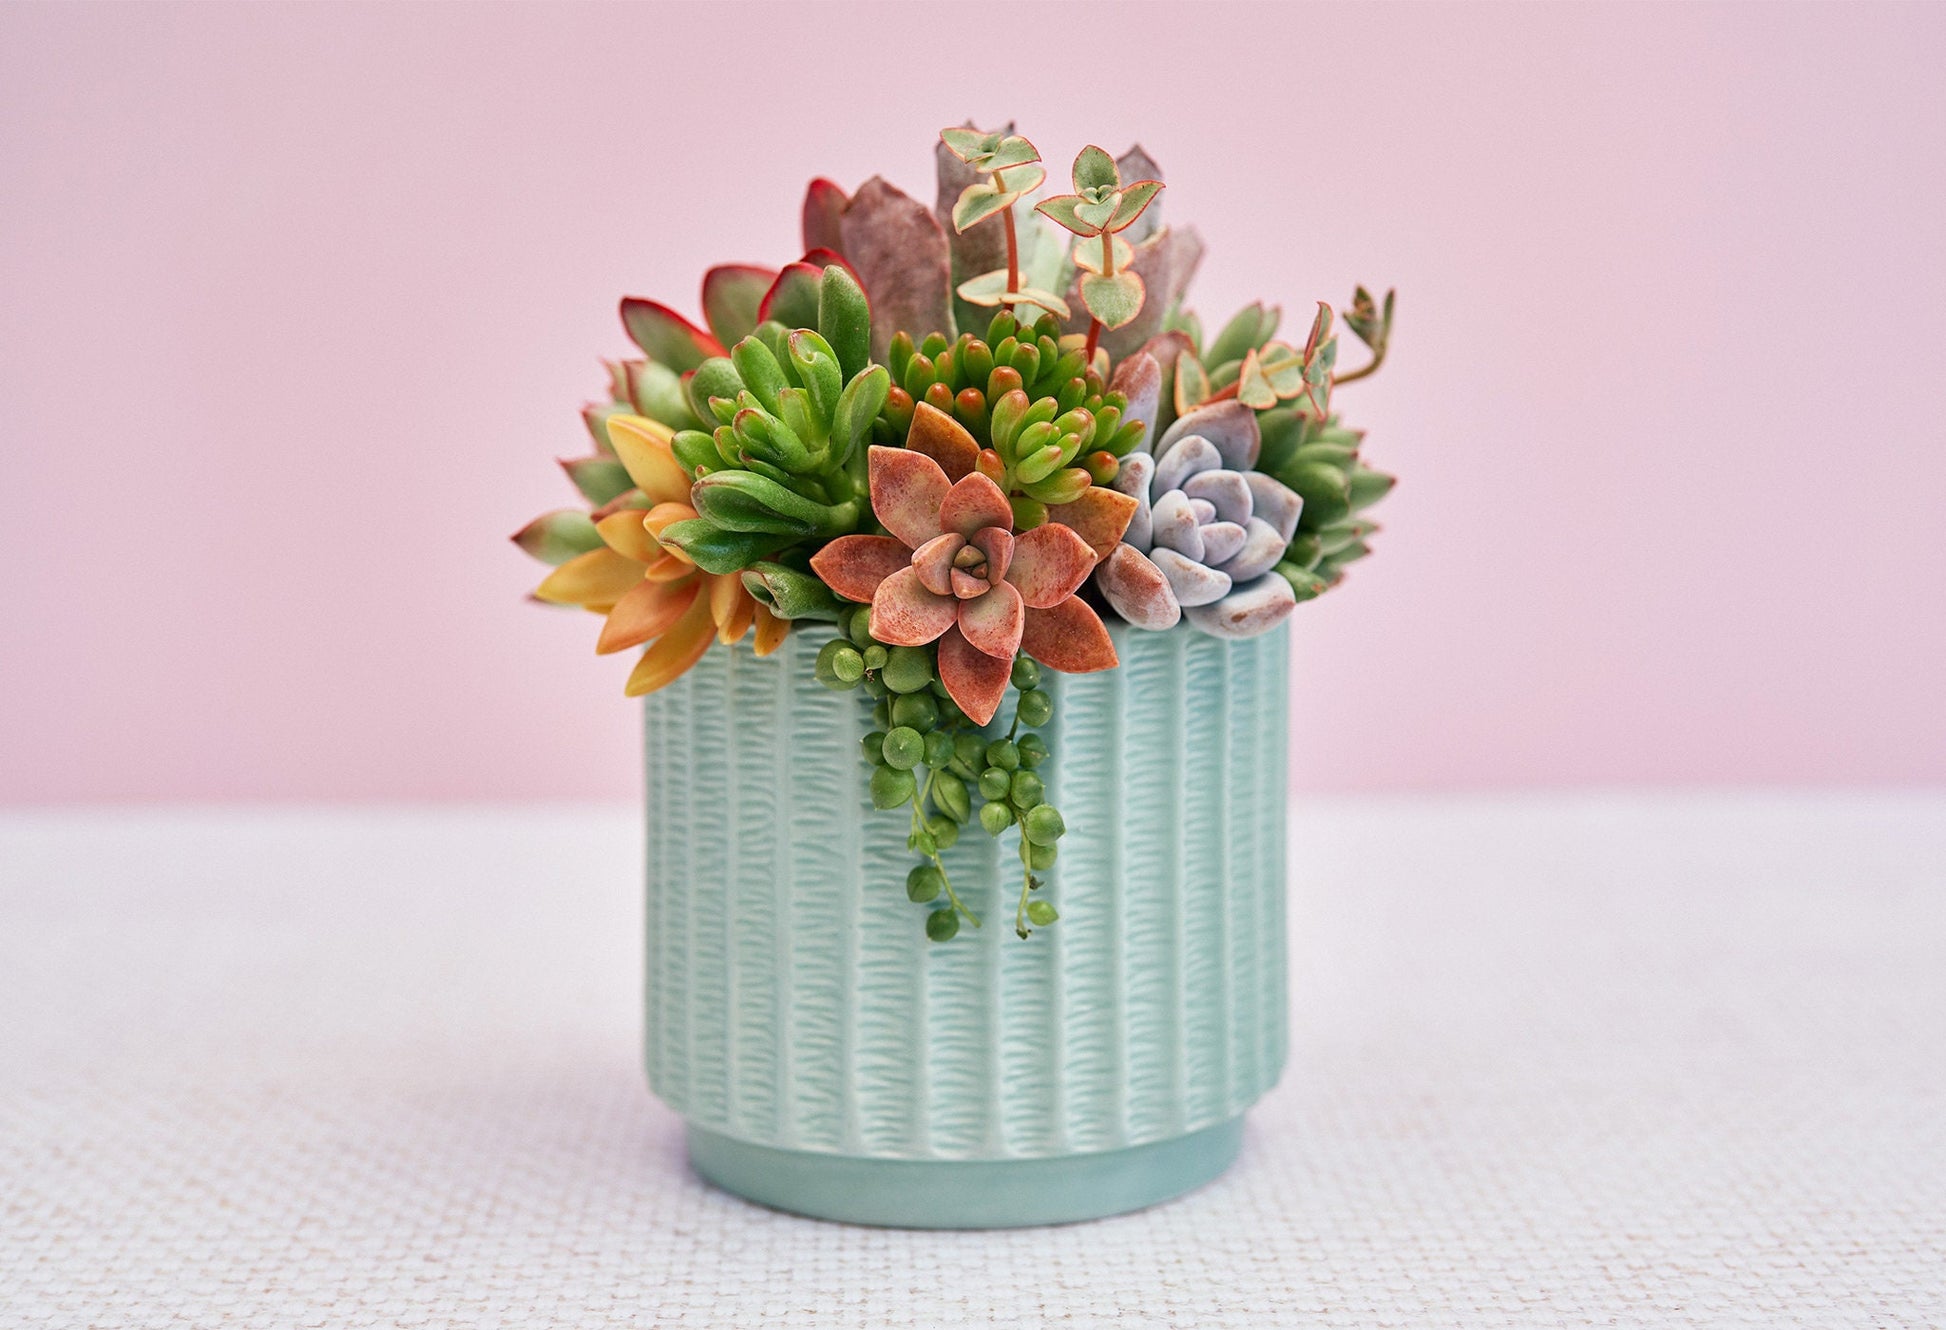 Mint Hatched Succulent Arrangement Gift | Birthday, Celebration, Sympathy, House Warming Living Gift for Plant Lovers | Gift for Mom